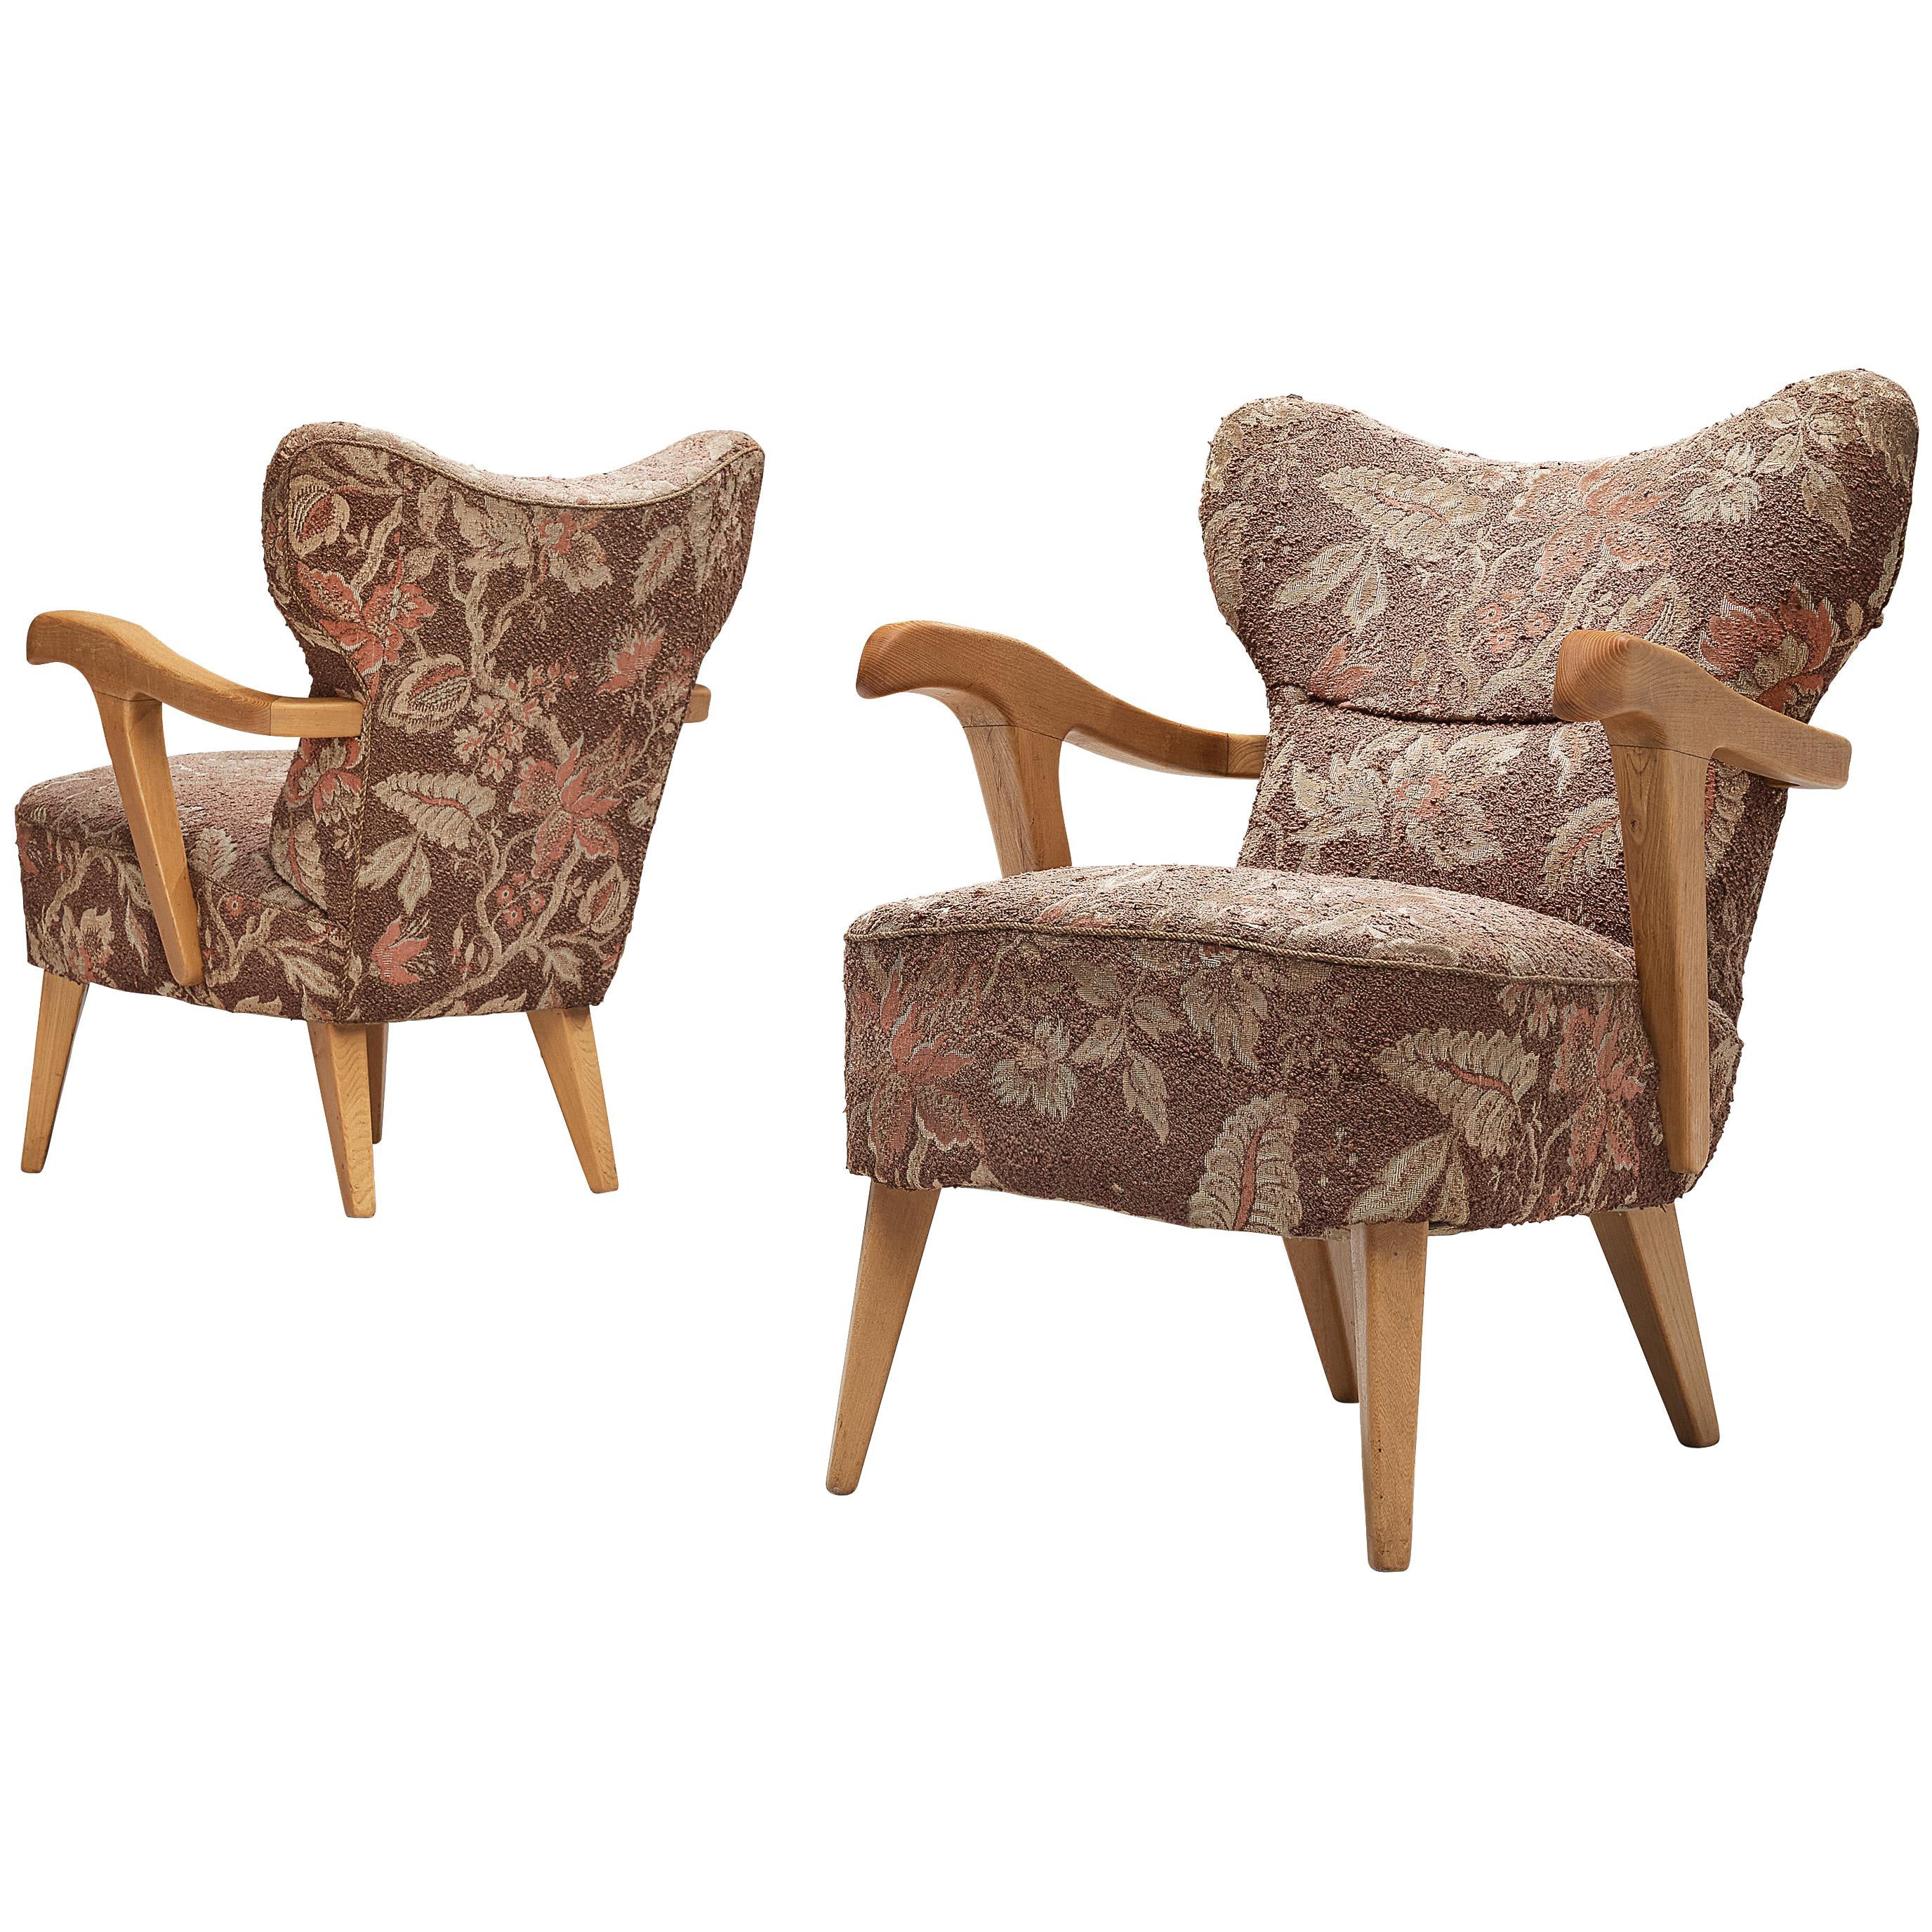 Pair of Sculptural Italian Lounge Chairs in Oak and Floral Upholstery  For Sale